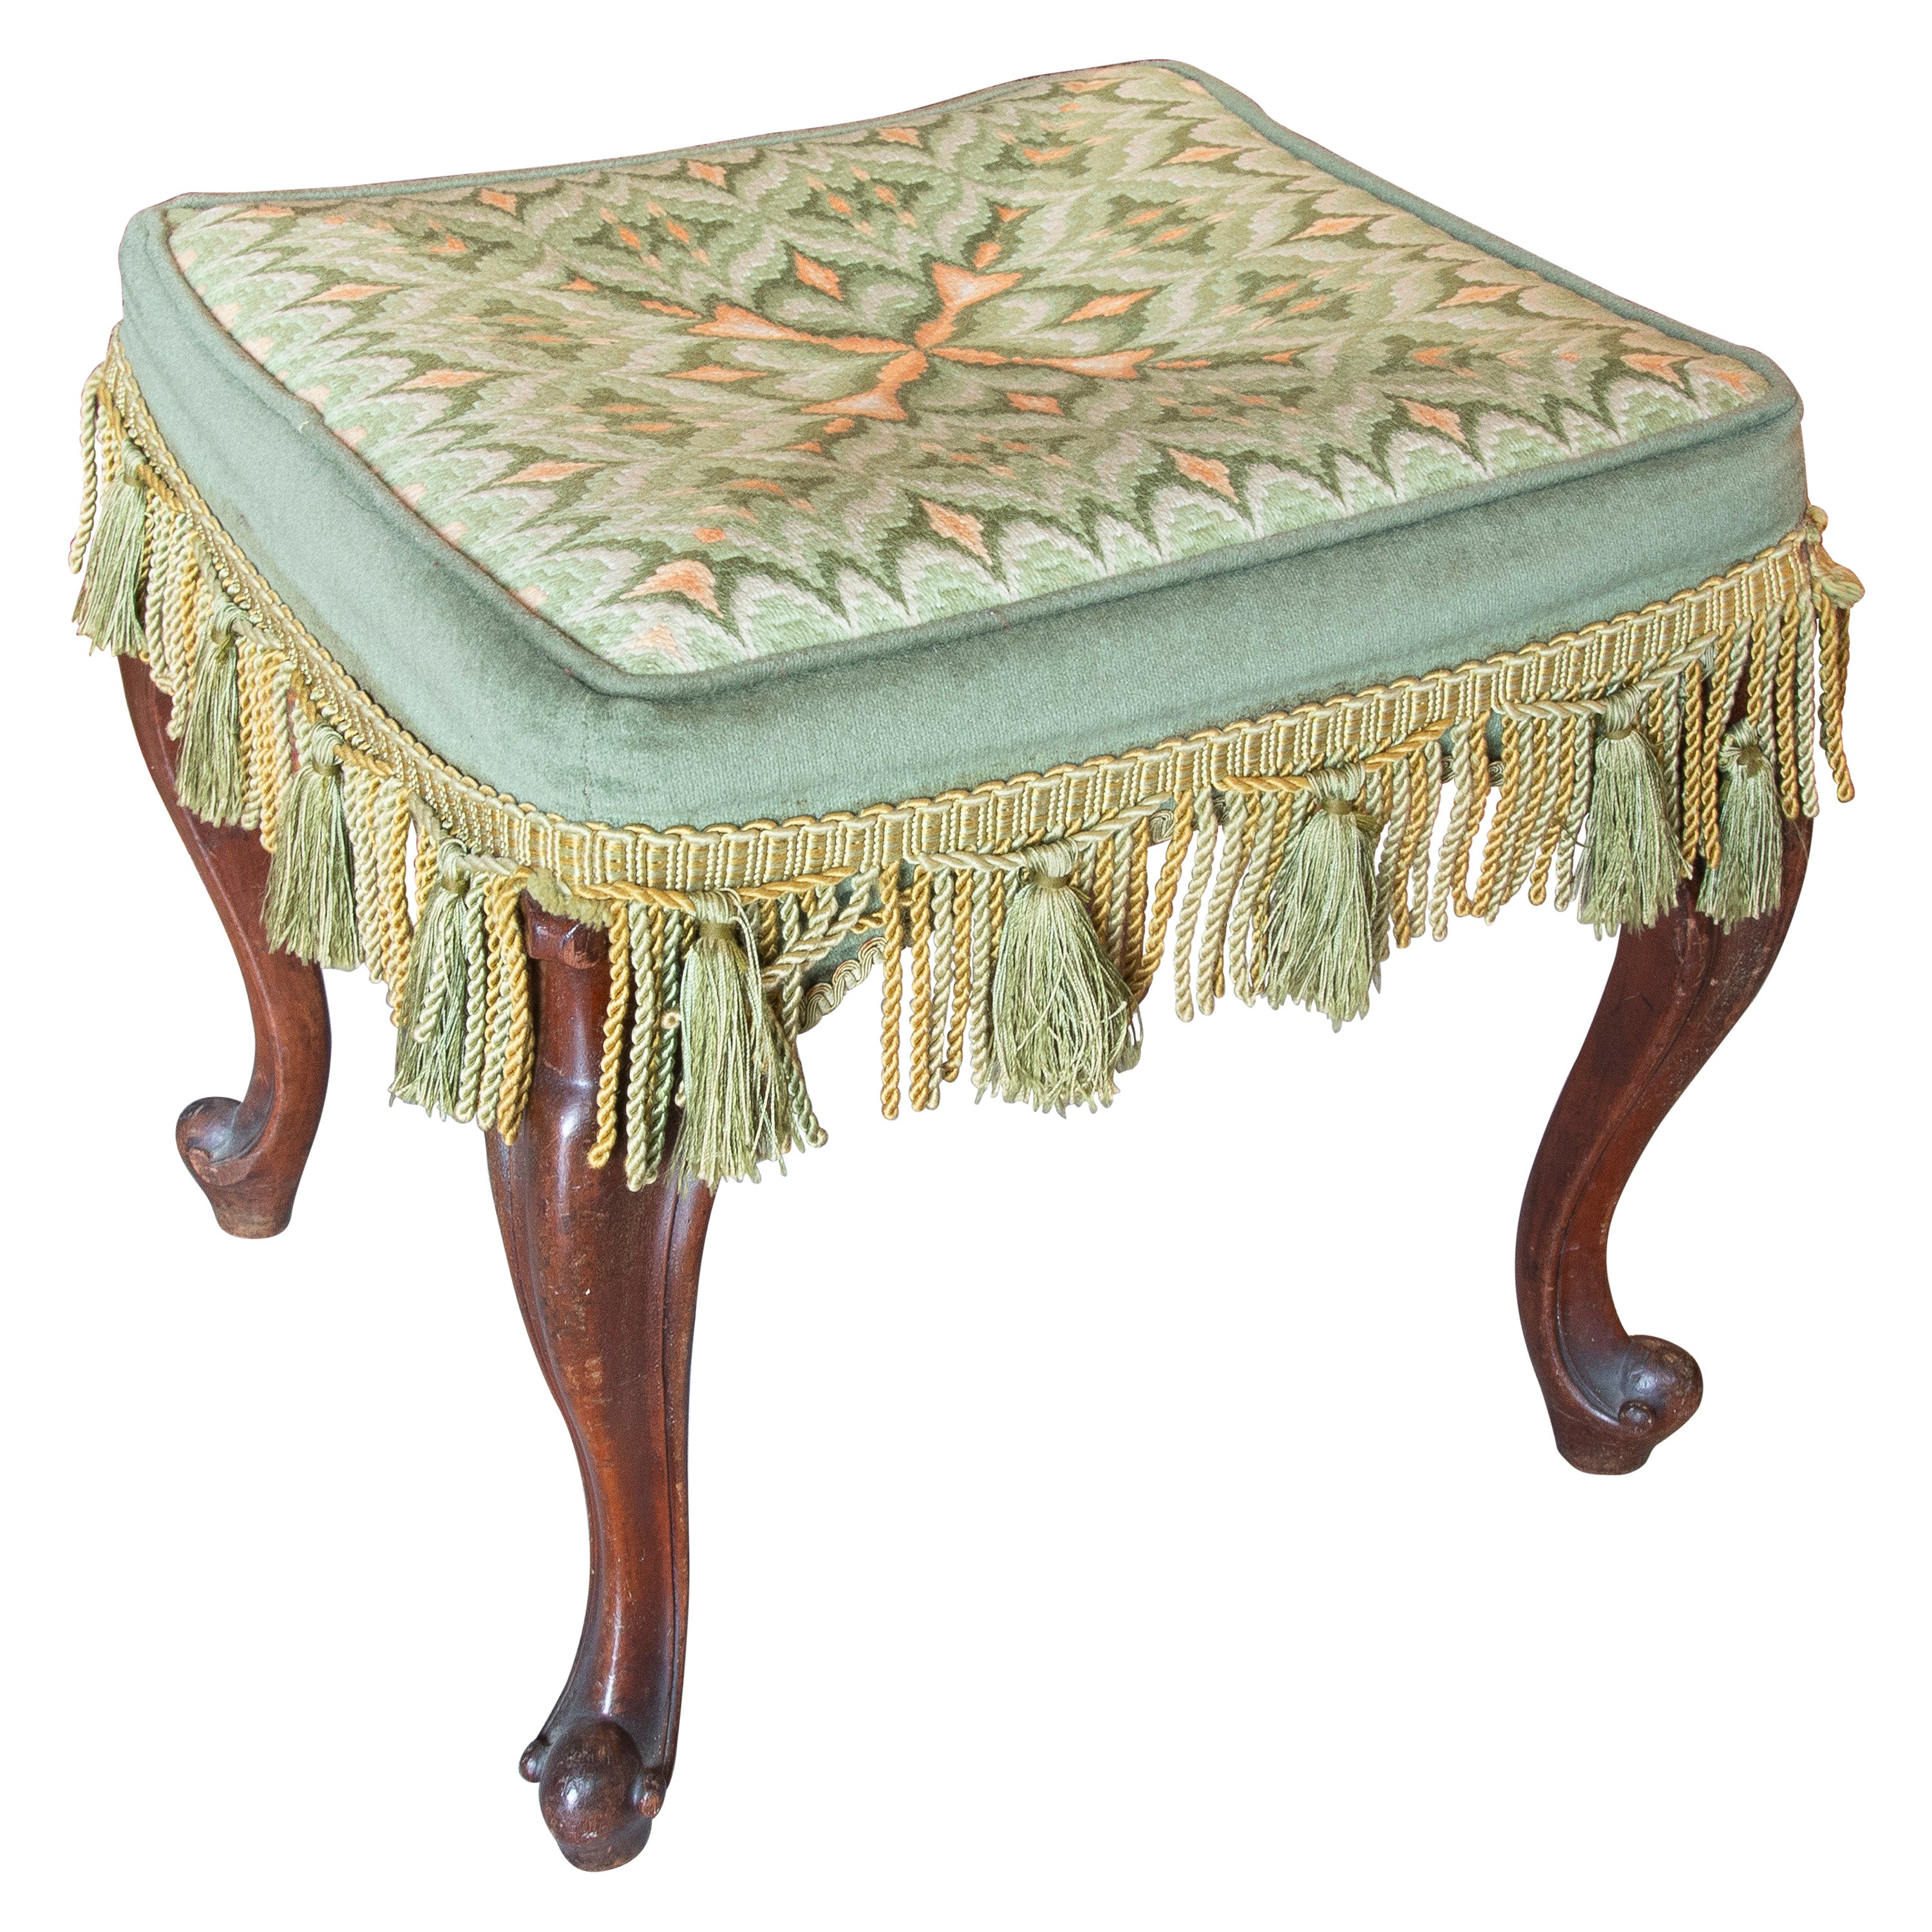 19th Century English Mahogany Stool with Embroidered Seat 